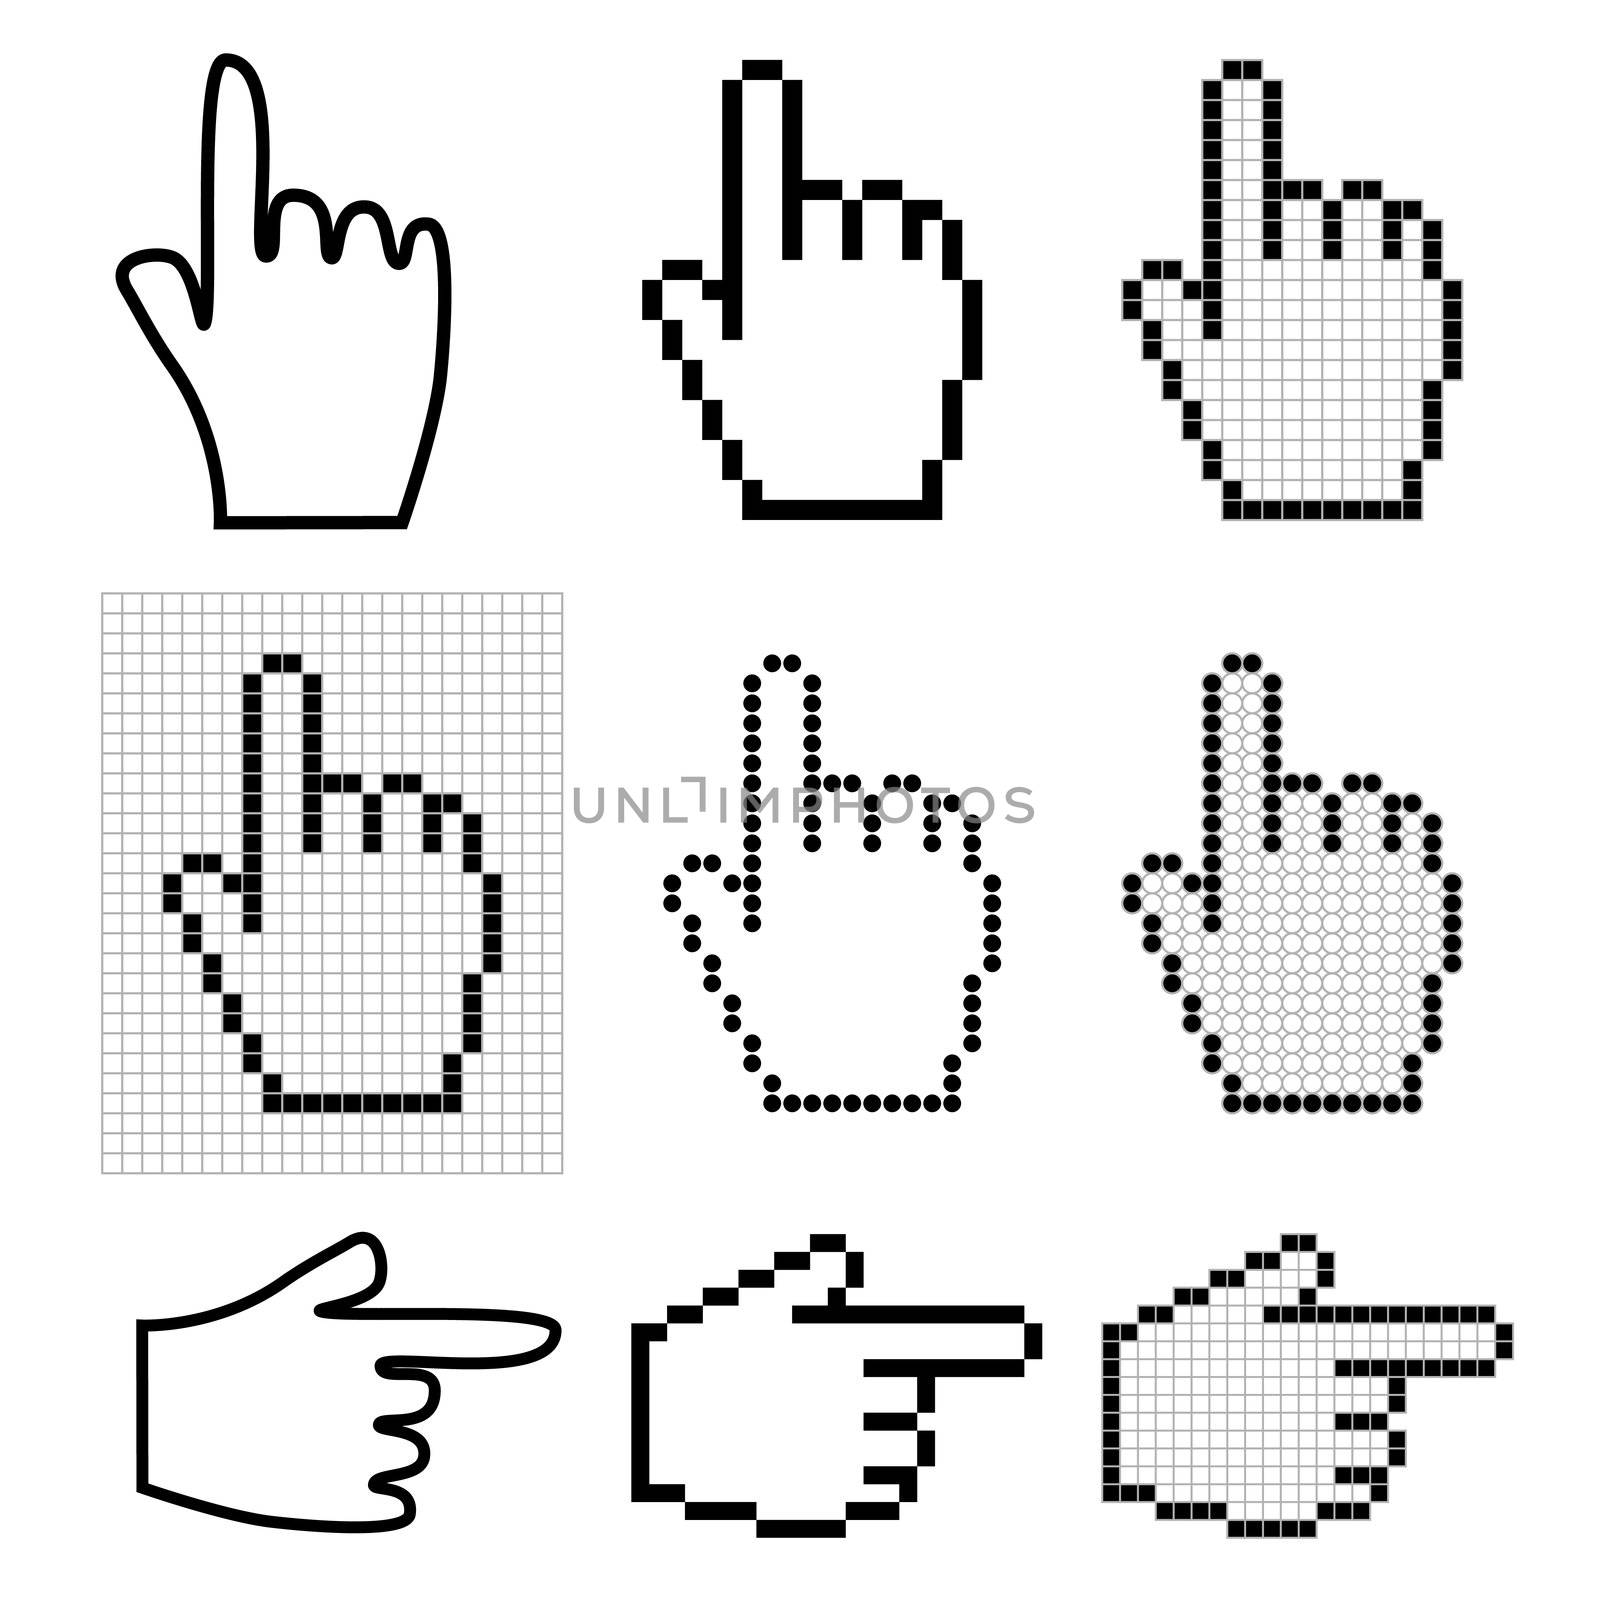 Set of 9 hand mouse cursors